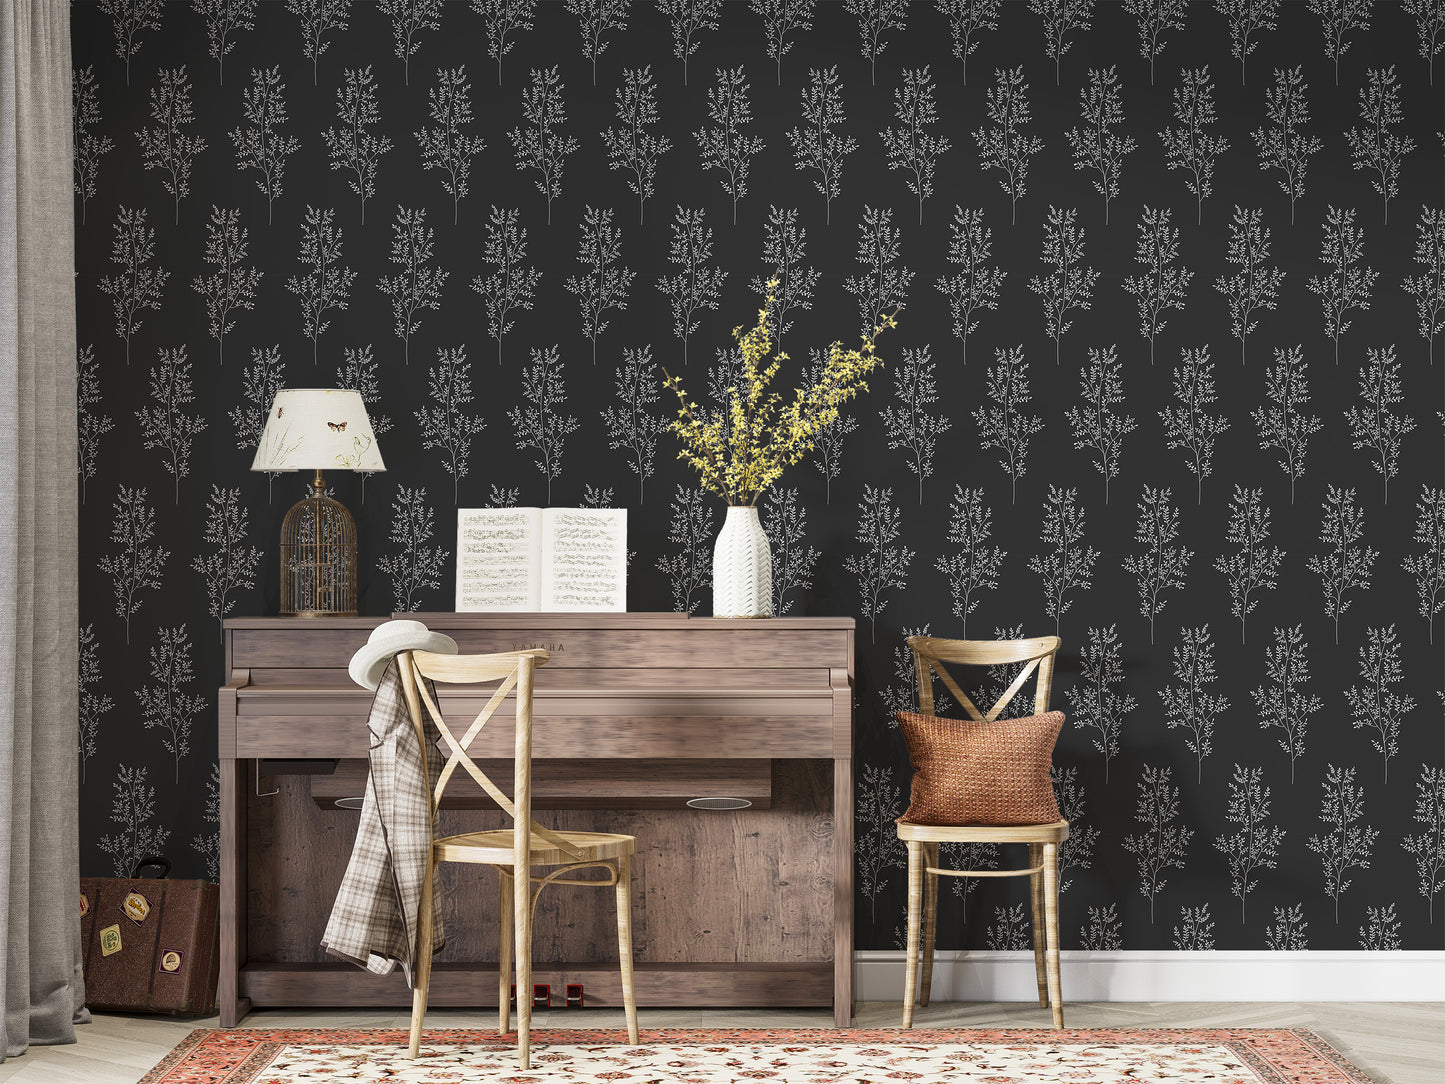 Elevate your walls with eco-friendly black floral wallpaper